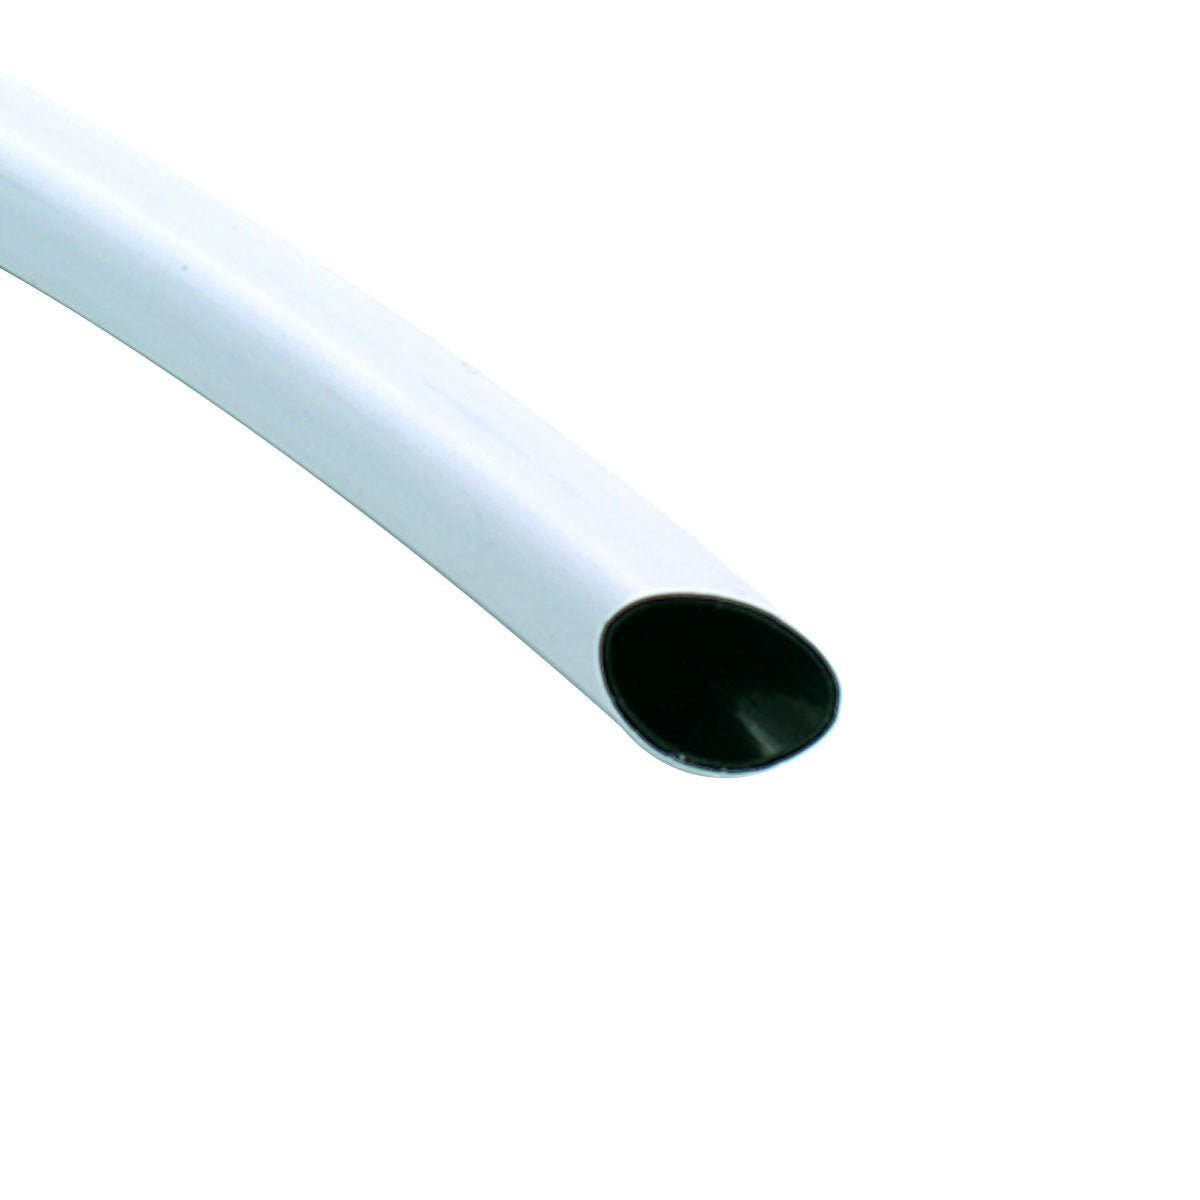 Product Secondary Image:FloraFlex Double Layer Tubing 16-17mm